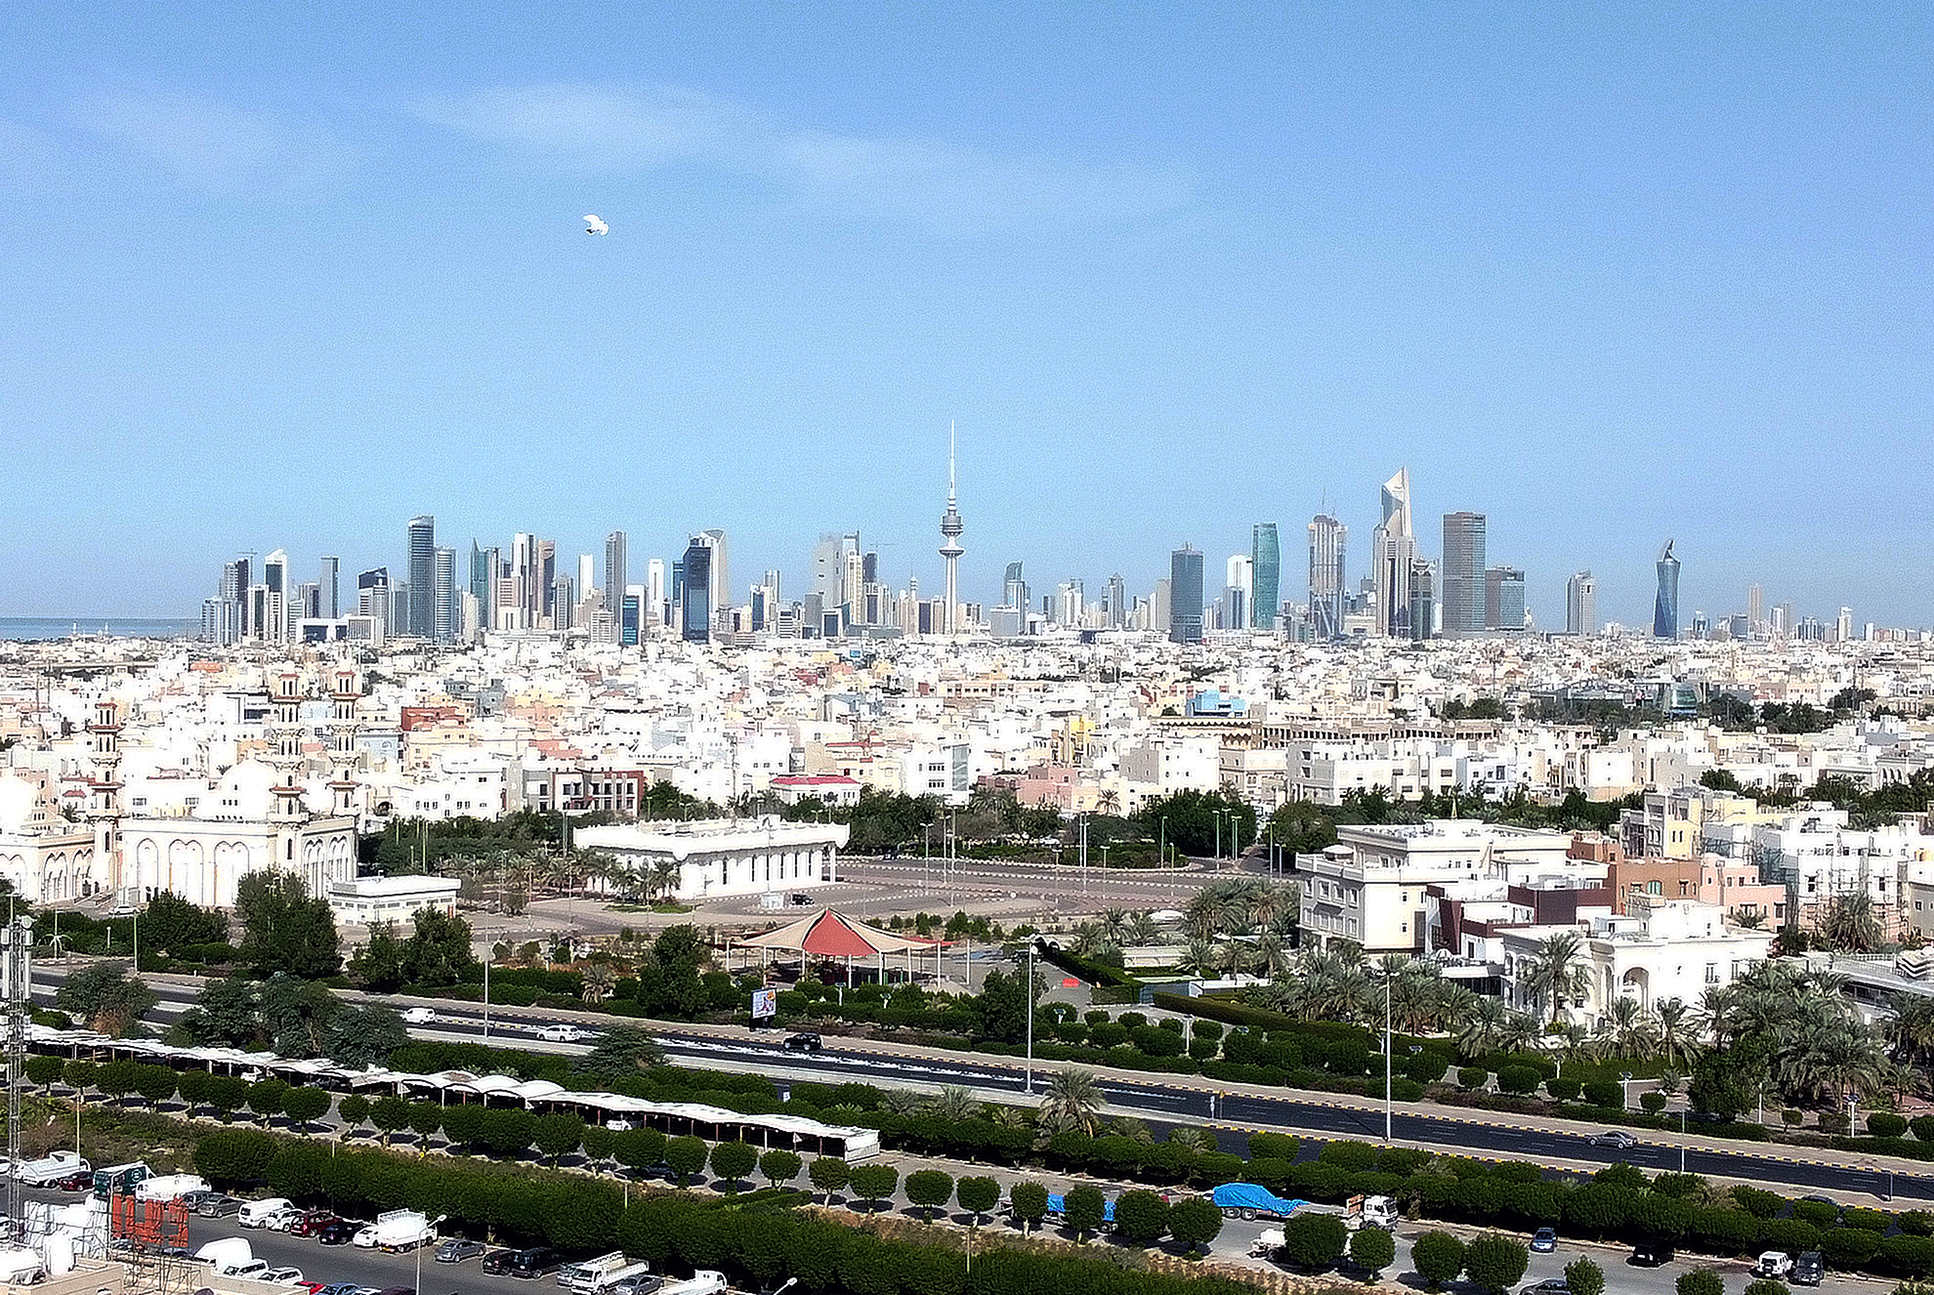 KUWAIT: An archive photo showing a general view of residential areas in Kuwait City’s suburbs. — Photo by Yasser Al-Zayyat